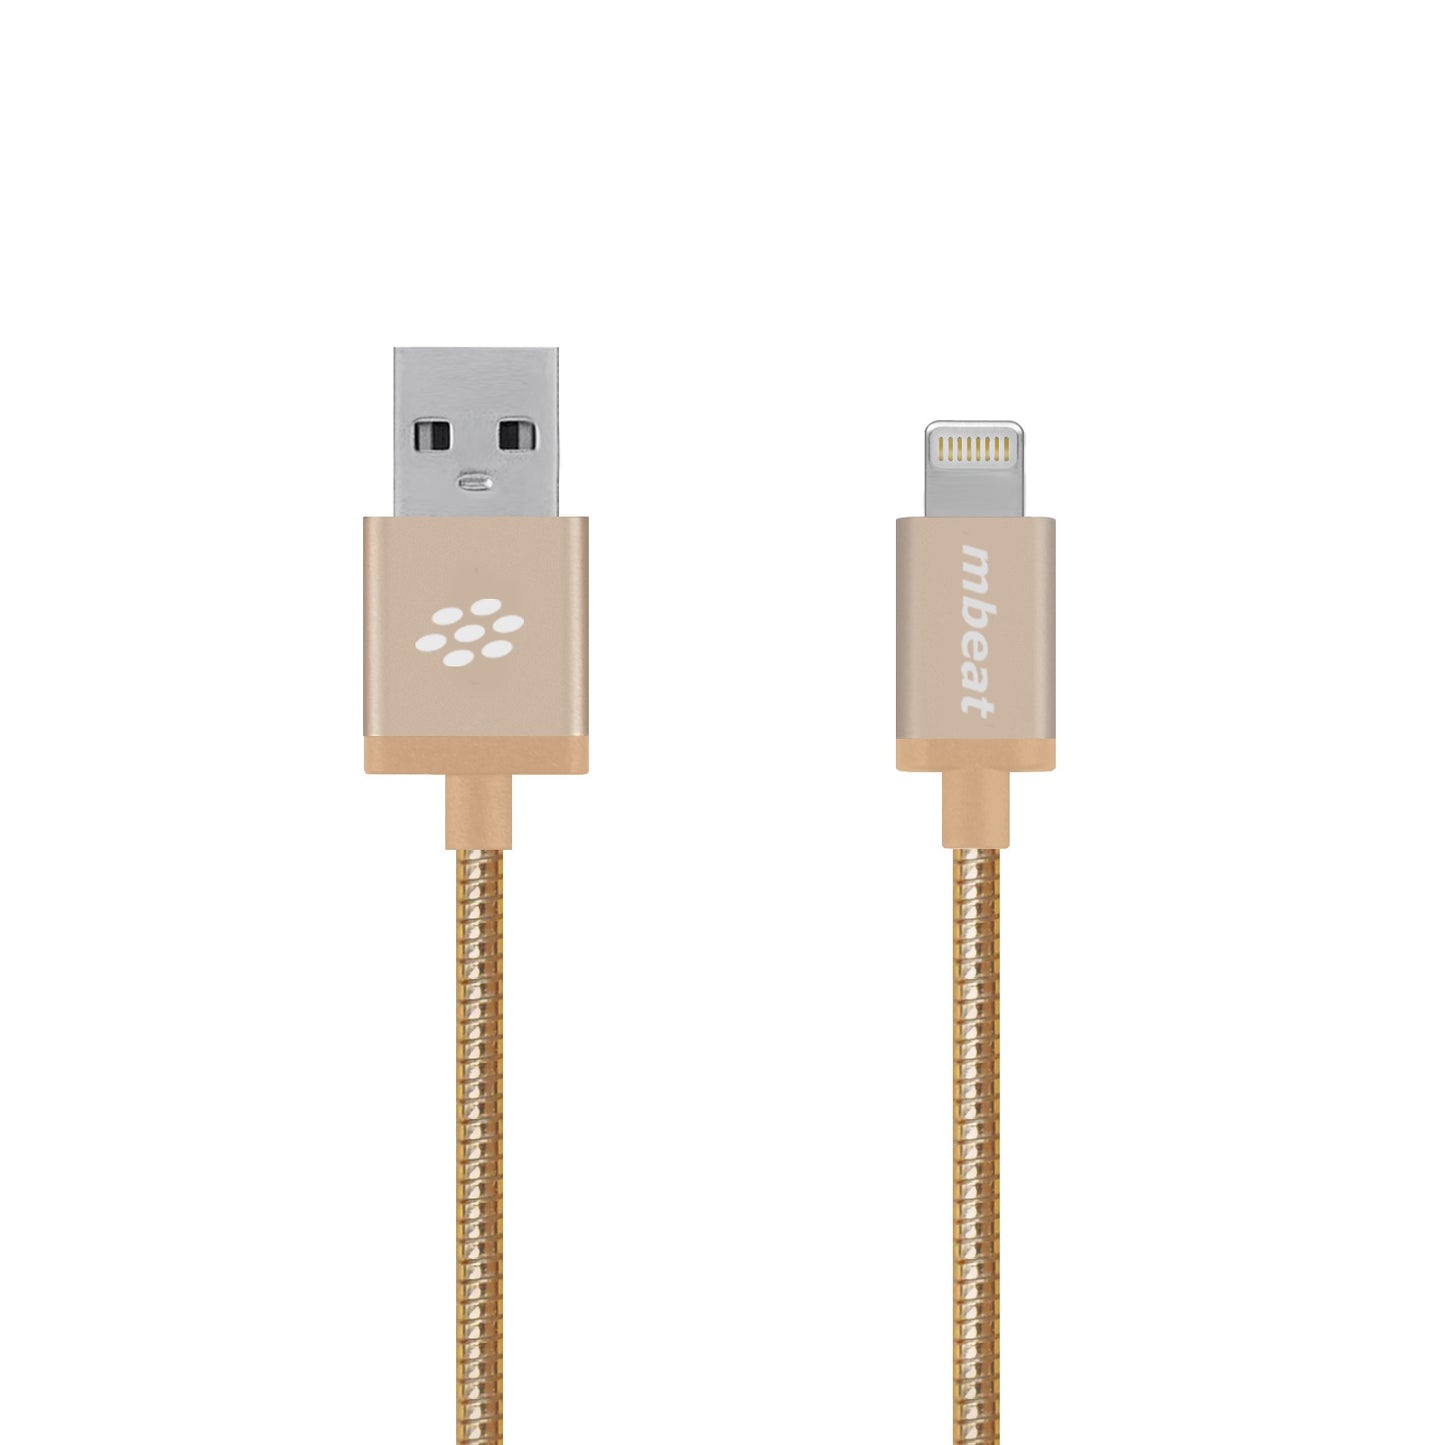 mbeat 'Toughlink'1.2m Lightning Fast Charger Cable - Gold/Durable Metal Braided/MFI/Apple iPhone X 11 7S 7 8 Plus XR 6S 6 5 5S iPod iPad Mini Ai MB-ICA-GLD